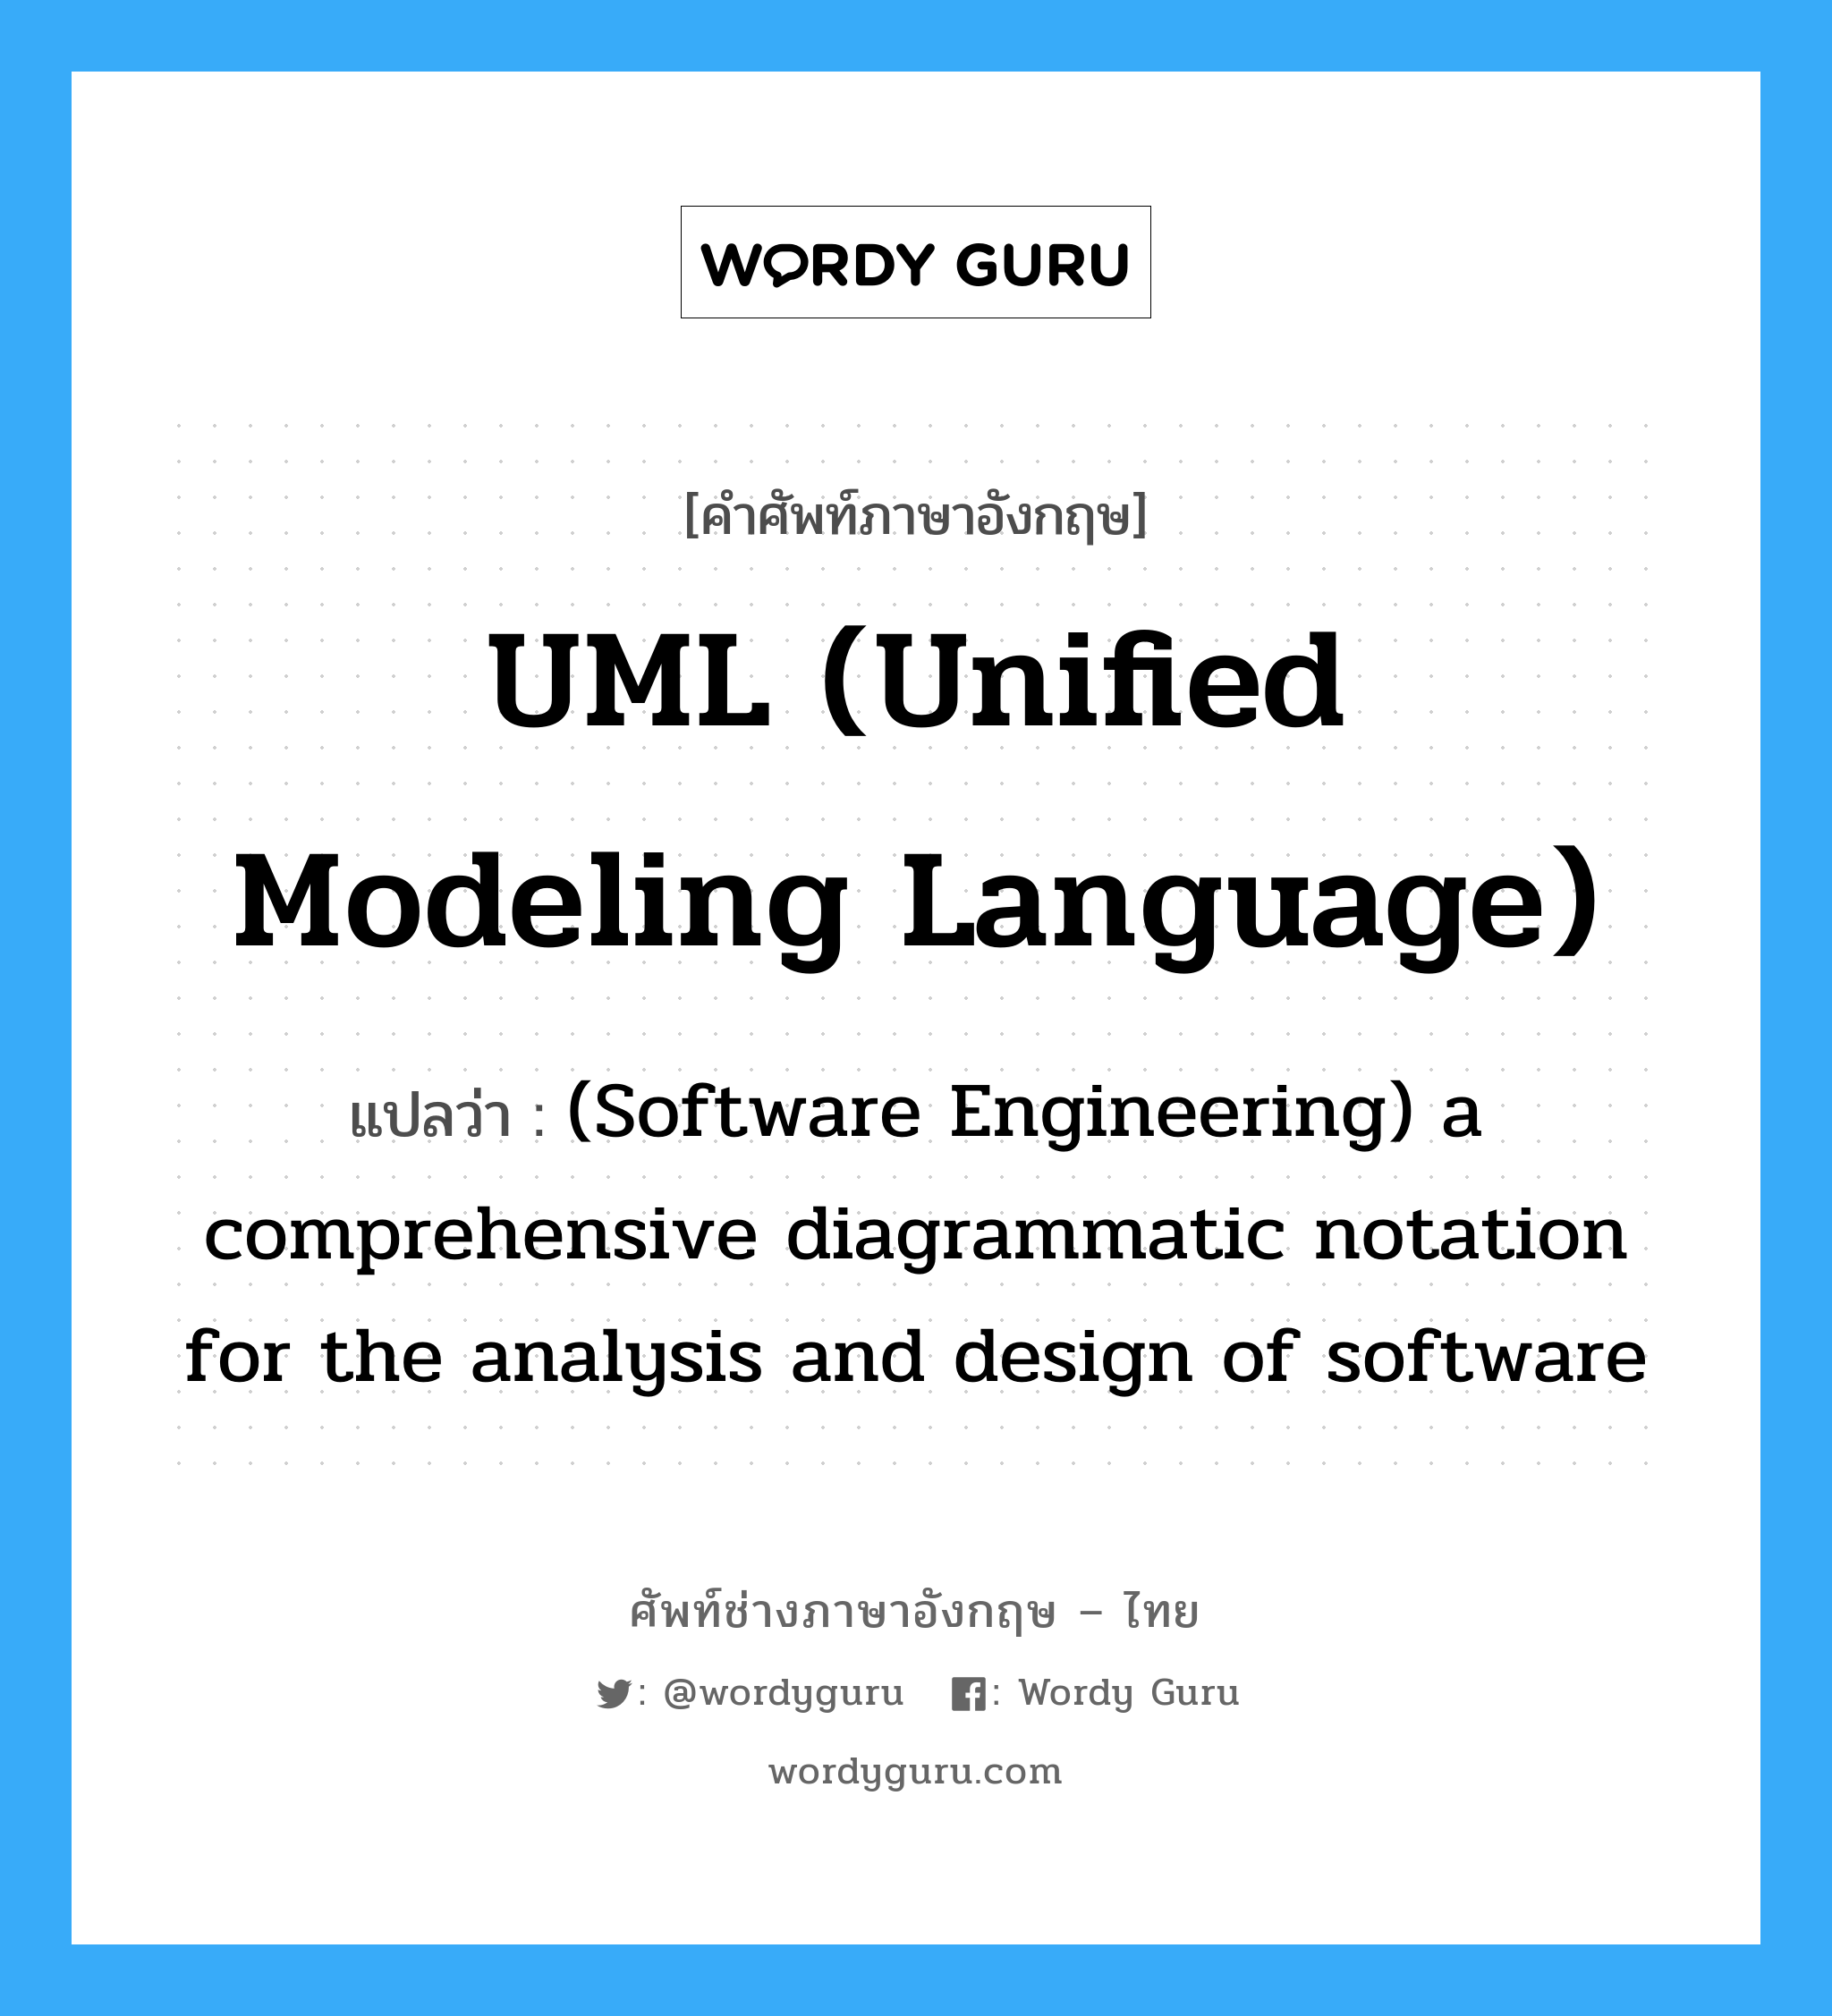 UML (Unified Modeling Language) แปลว่า?, คำศัพท์ช่างภาษาอังกฤษ - ไทย UML (Unified Modeling Language) คำศัพท์ภาษาอังกฤษ UML (Unified Modeling Language) แปลว่า (Software Engineering) a comprehensive diagrammatic notation for the analysis and design of software